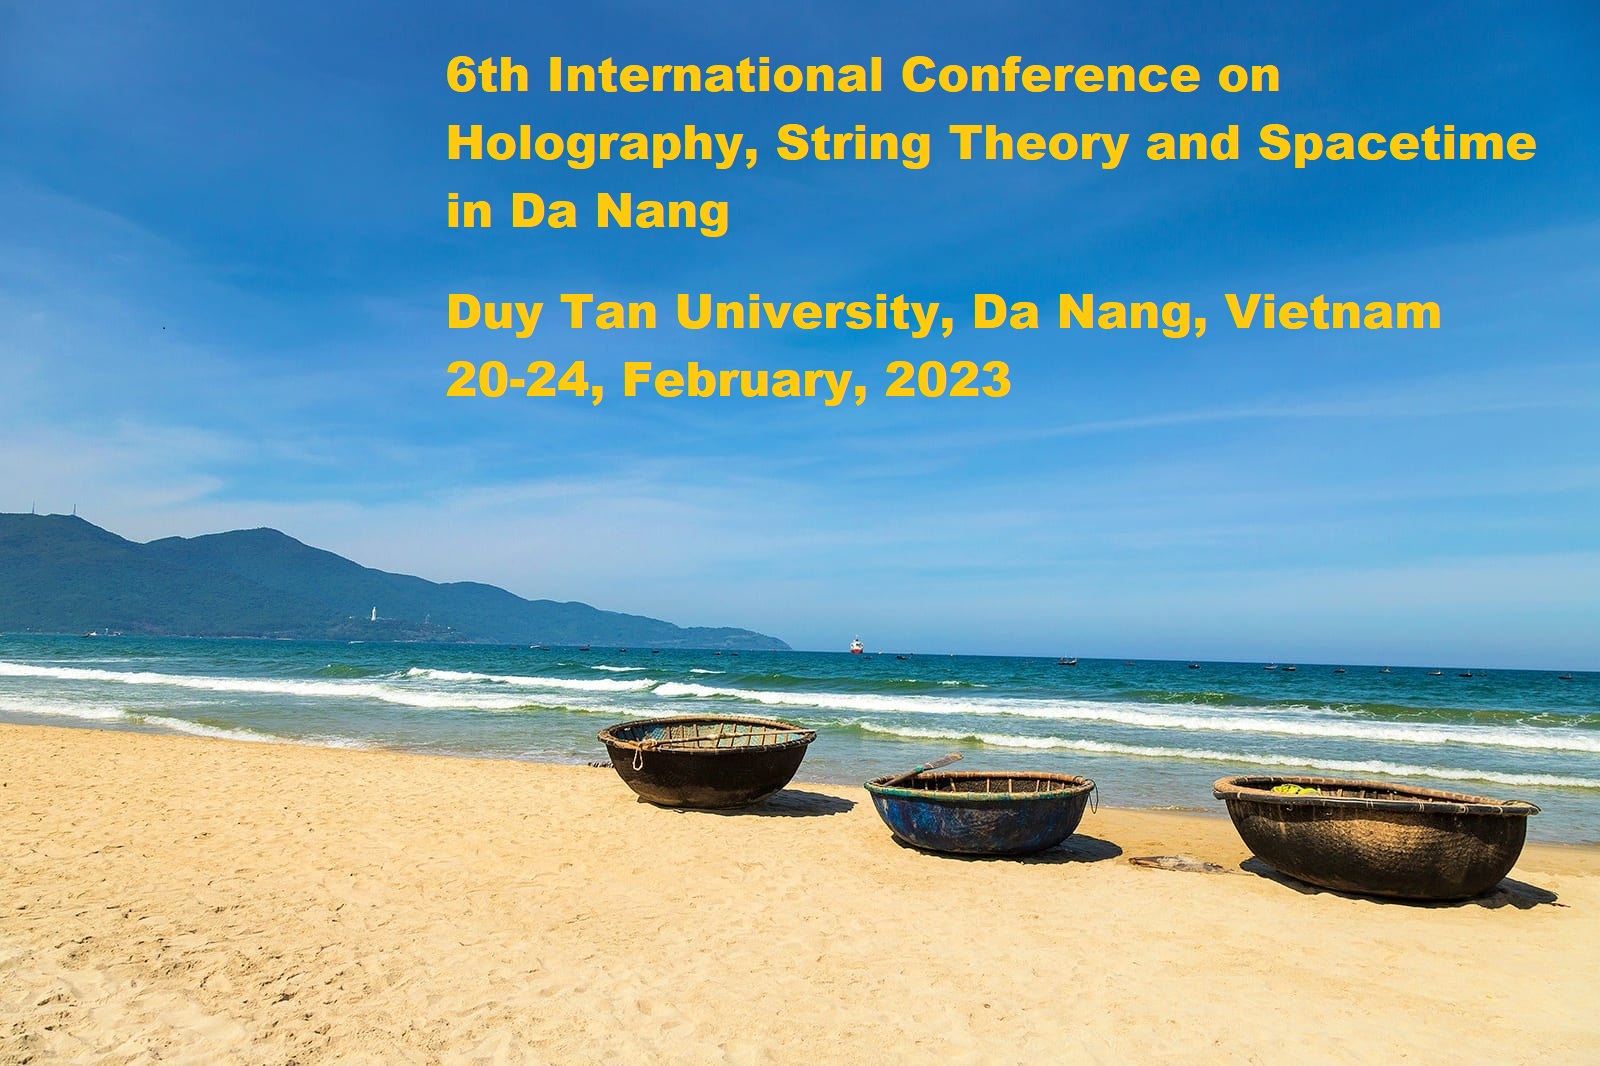 6th International Conference on Holography, String Theory and Spacetime in Da Nang